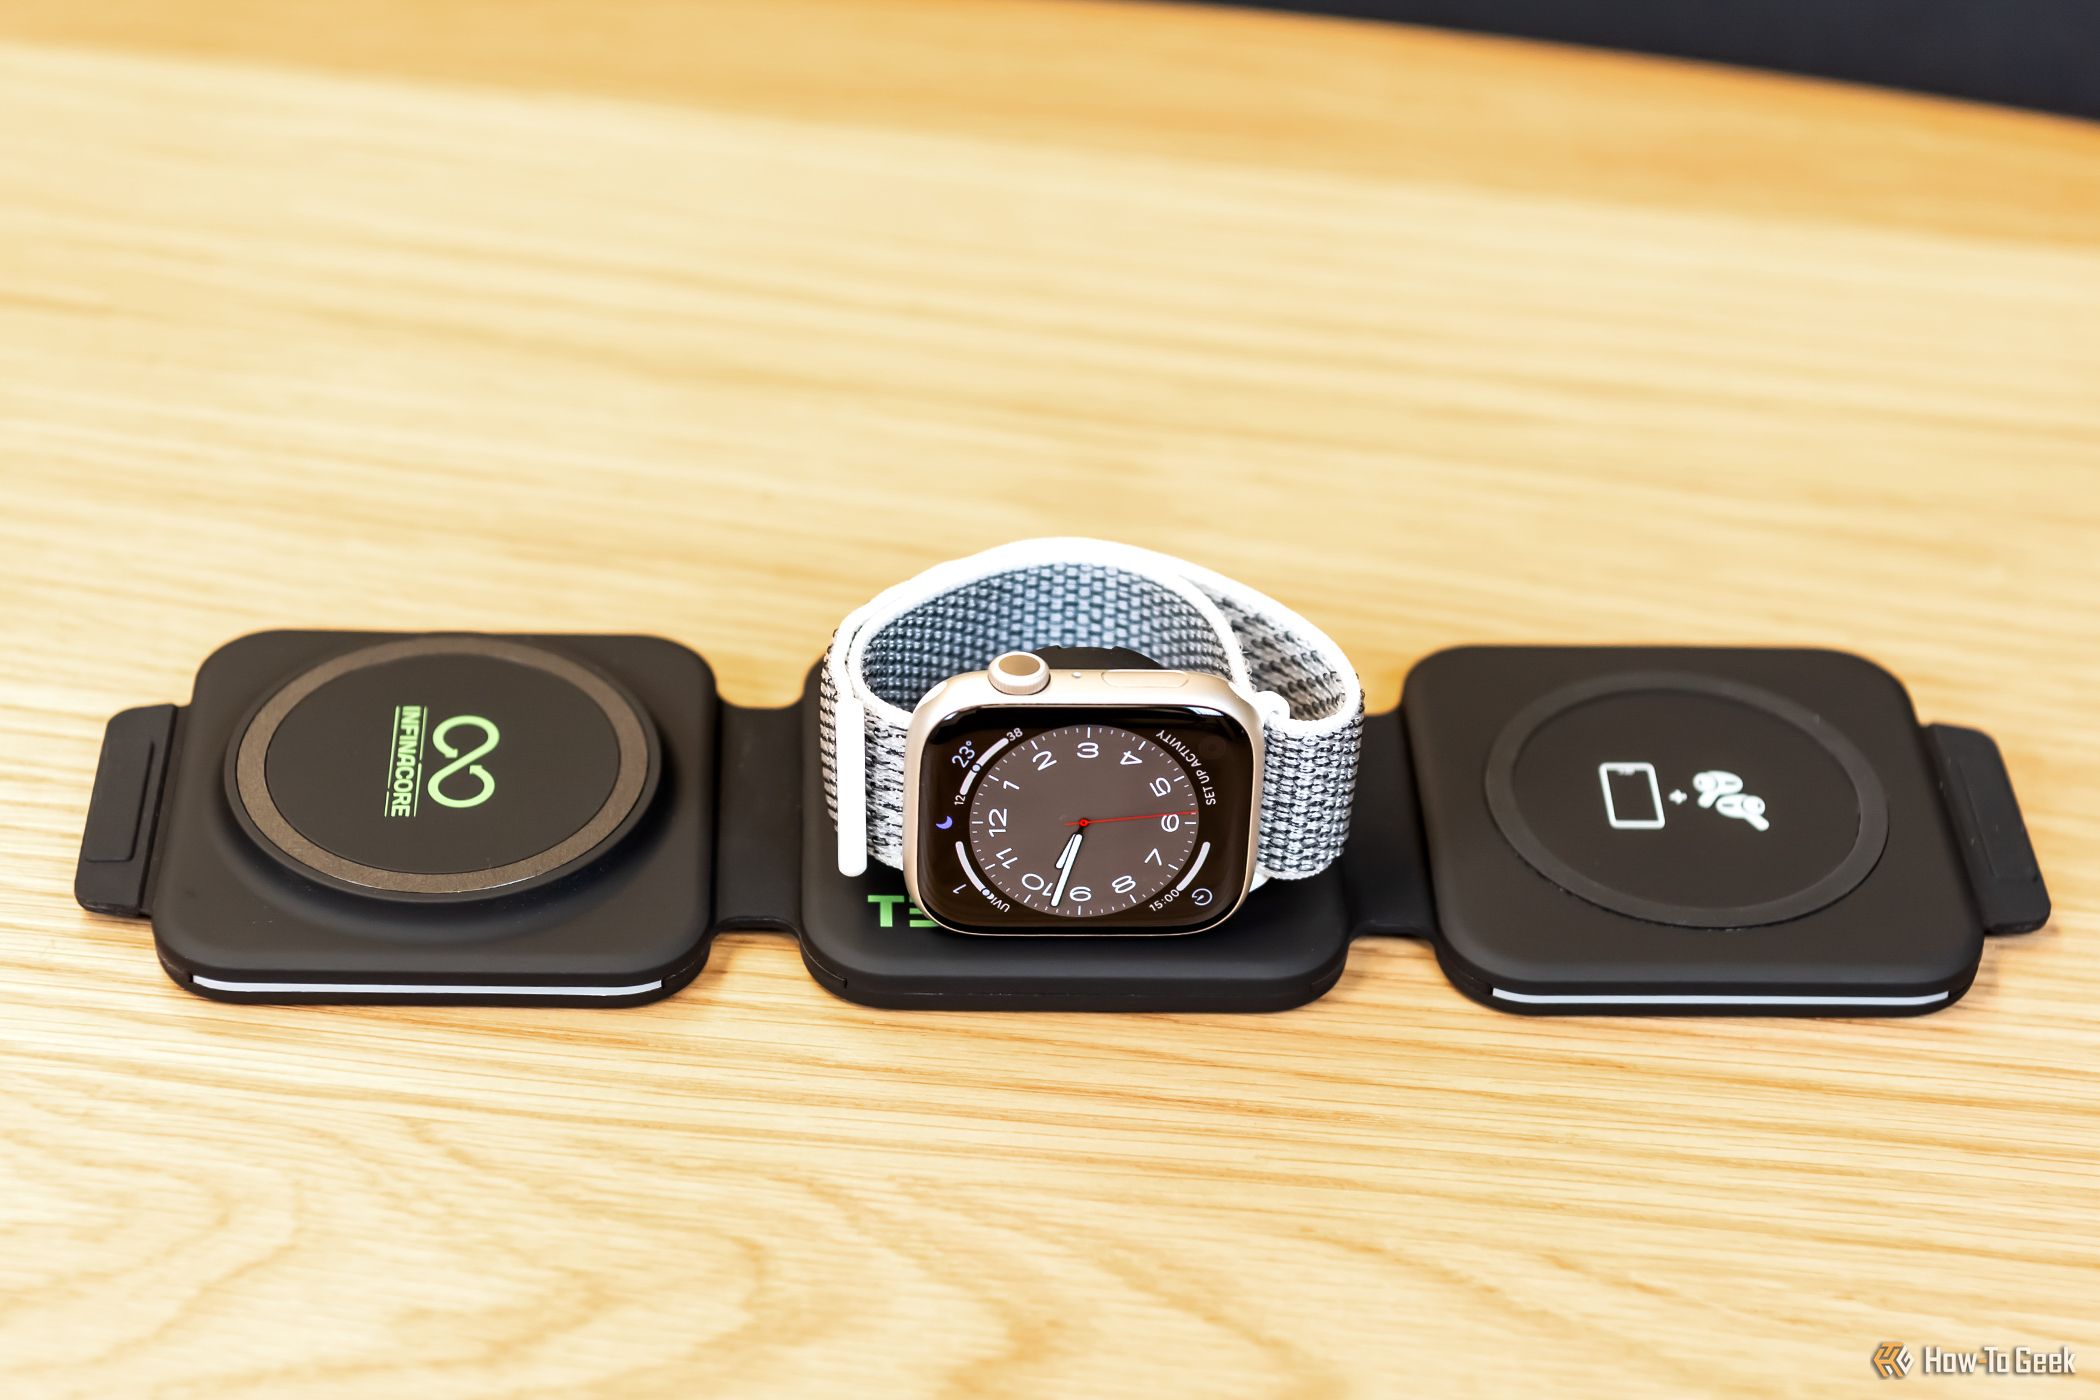 Charging an Apple Watch on the Infinacore T3 3-in-1 Wireless Charging Station